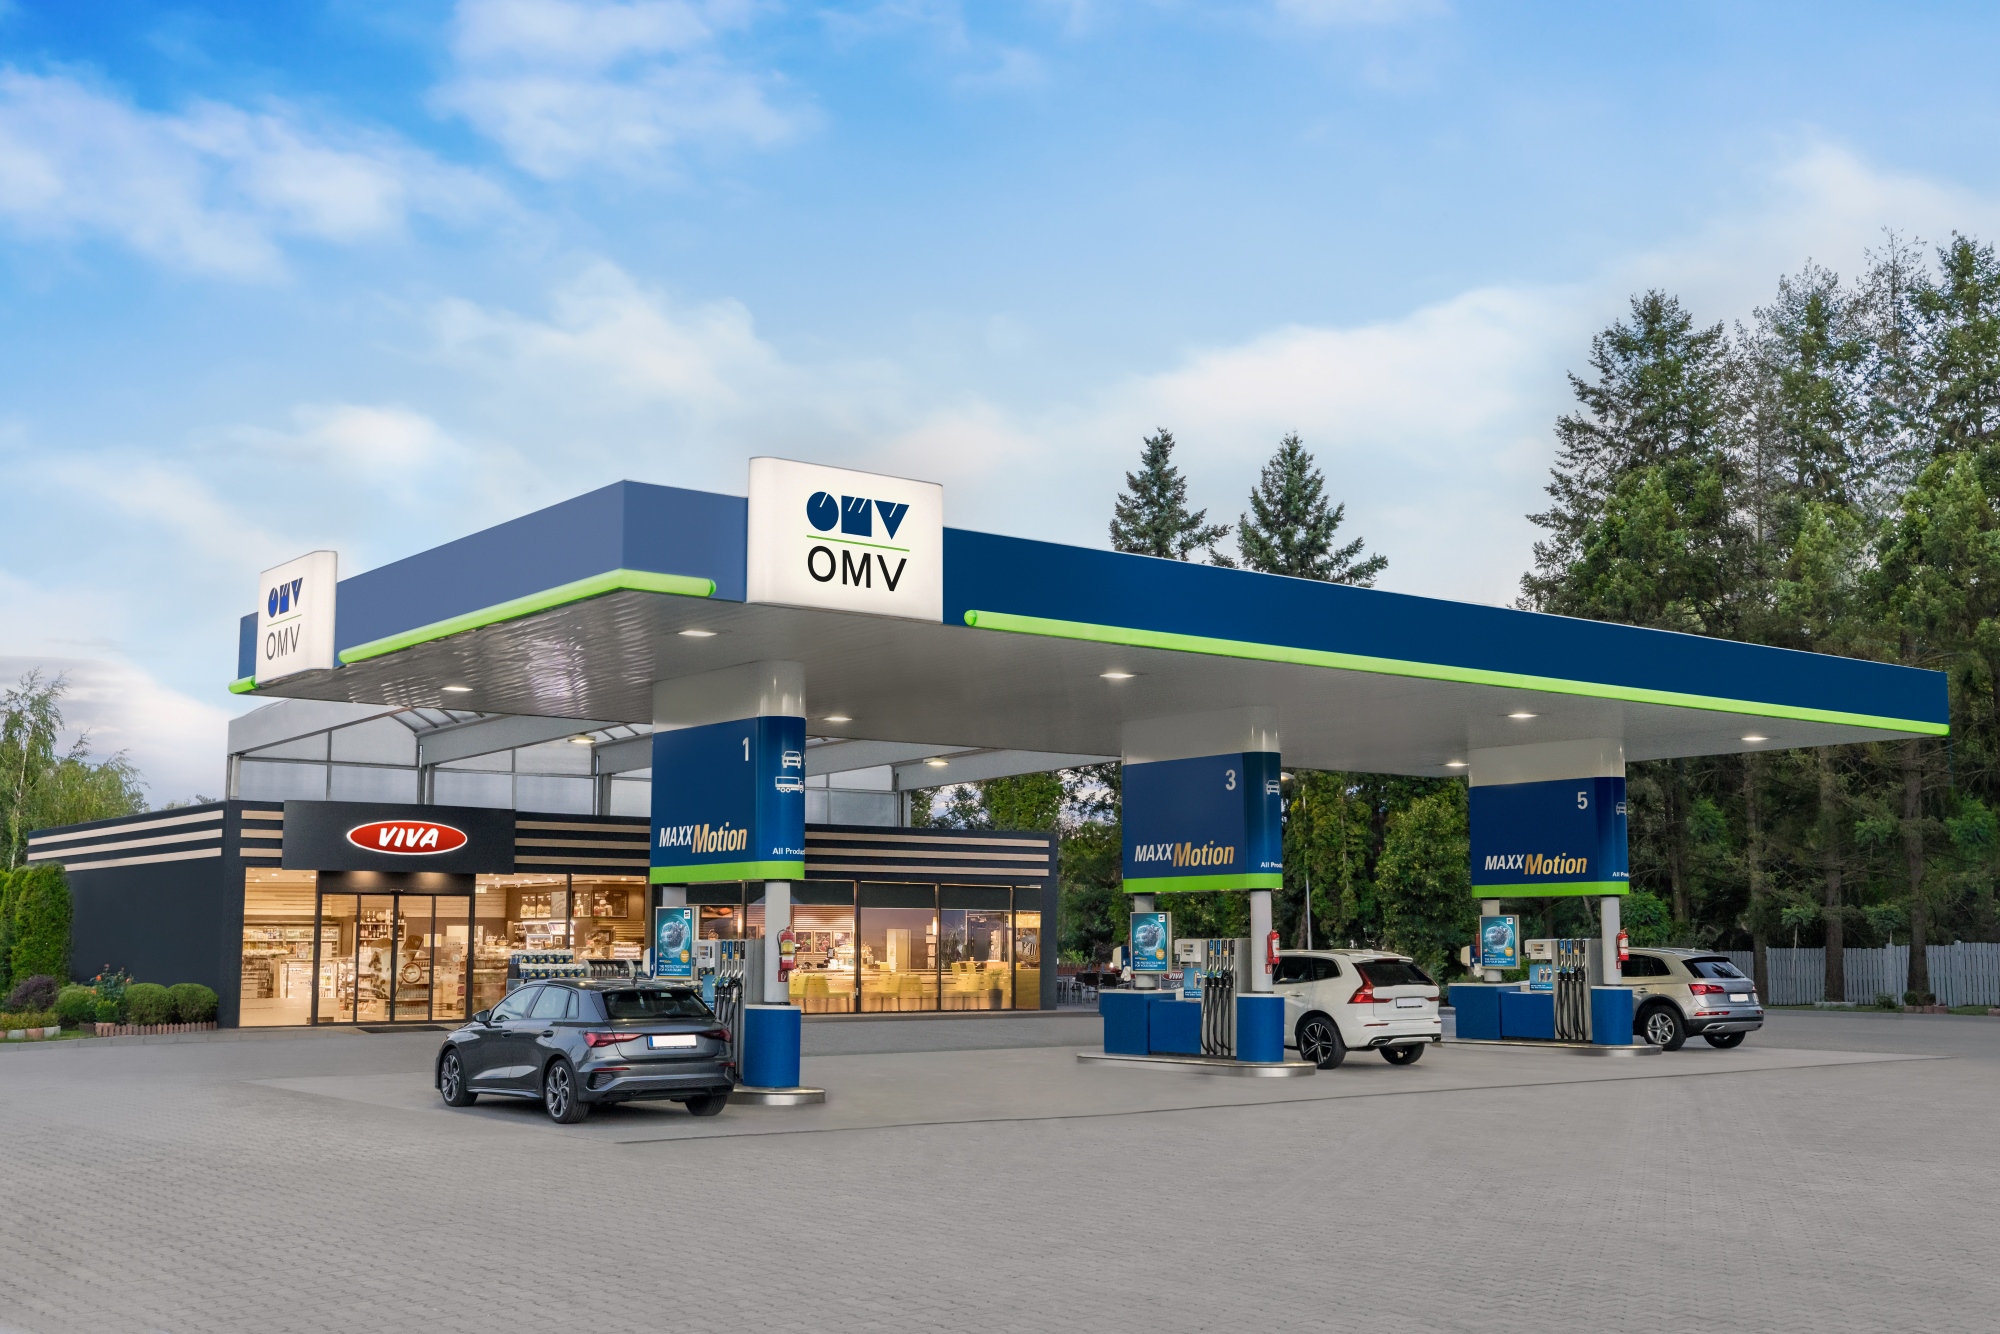 OMV to Sell Medicines at Nearly 100 Stations in Hungary